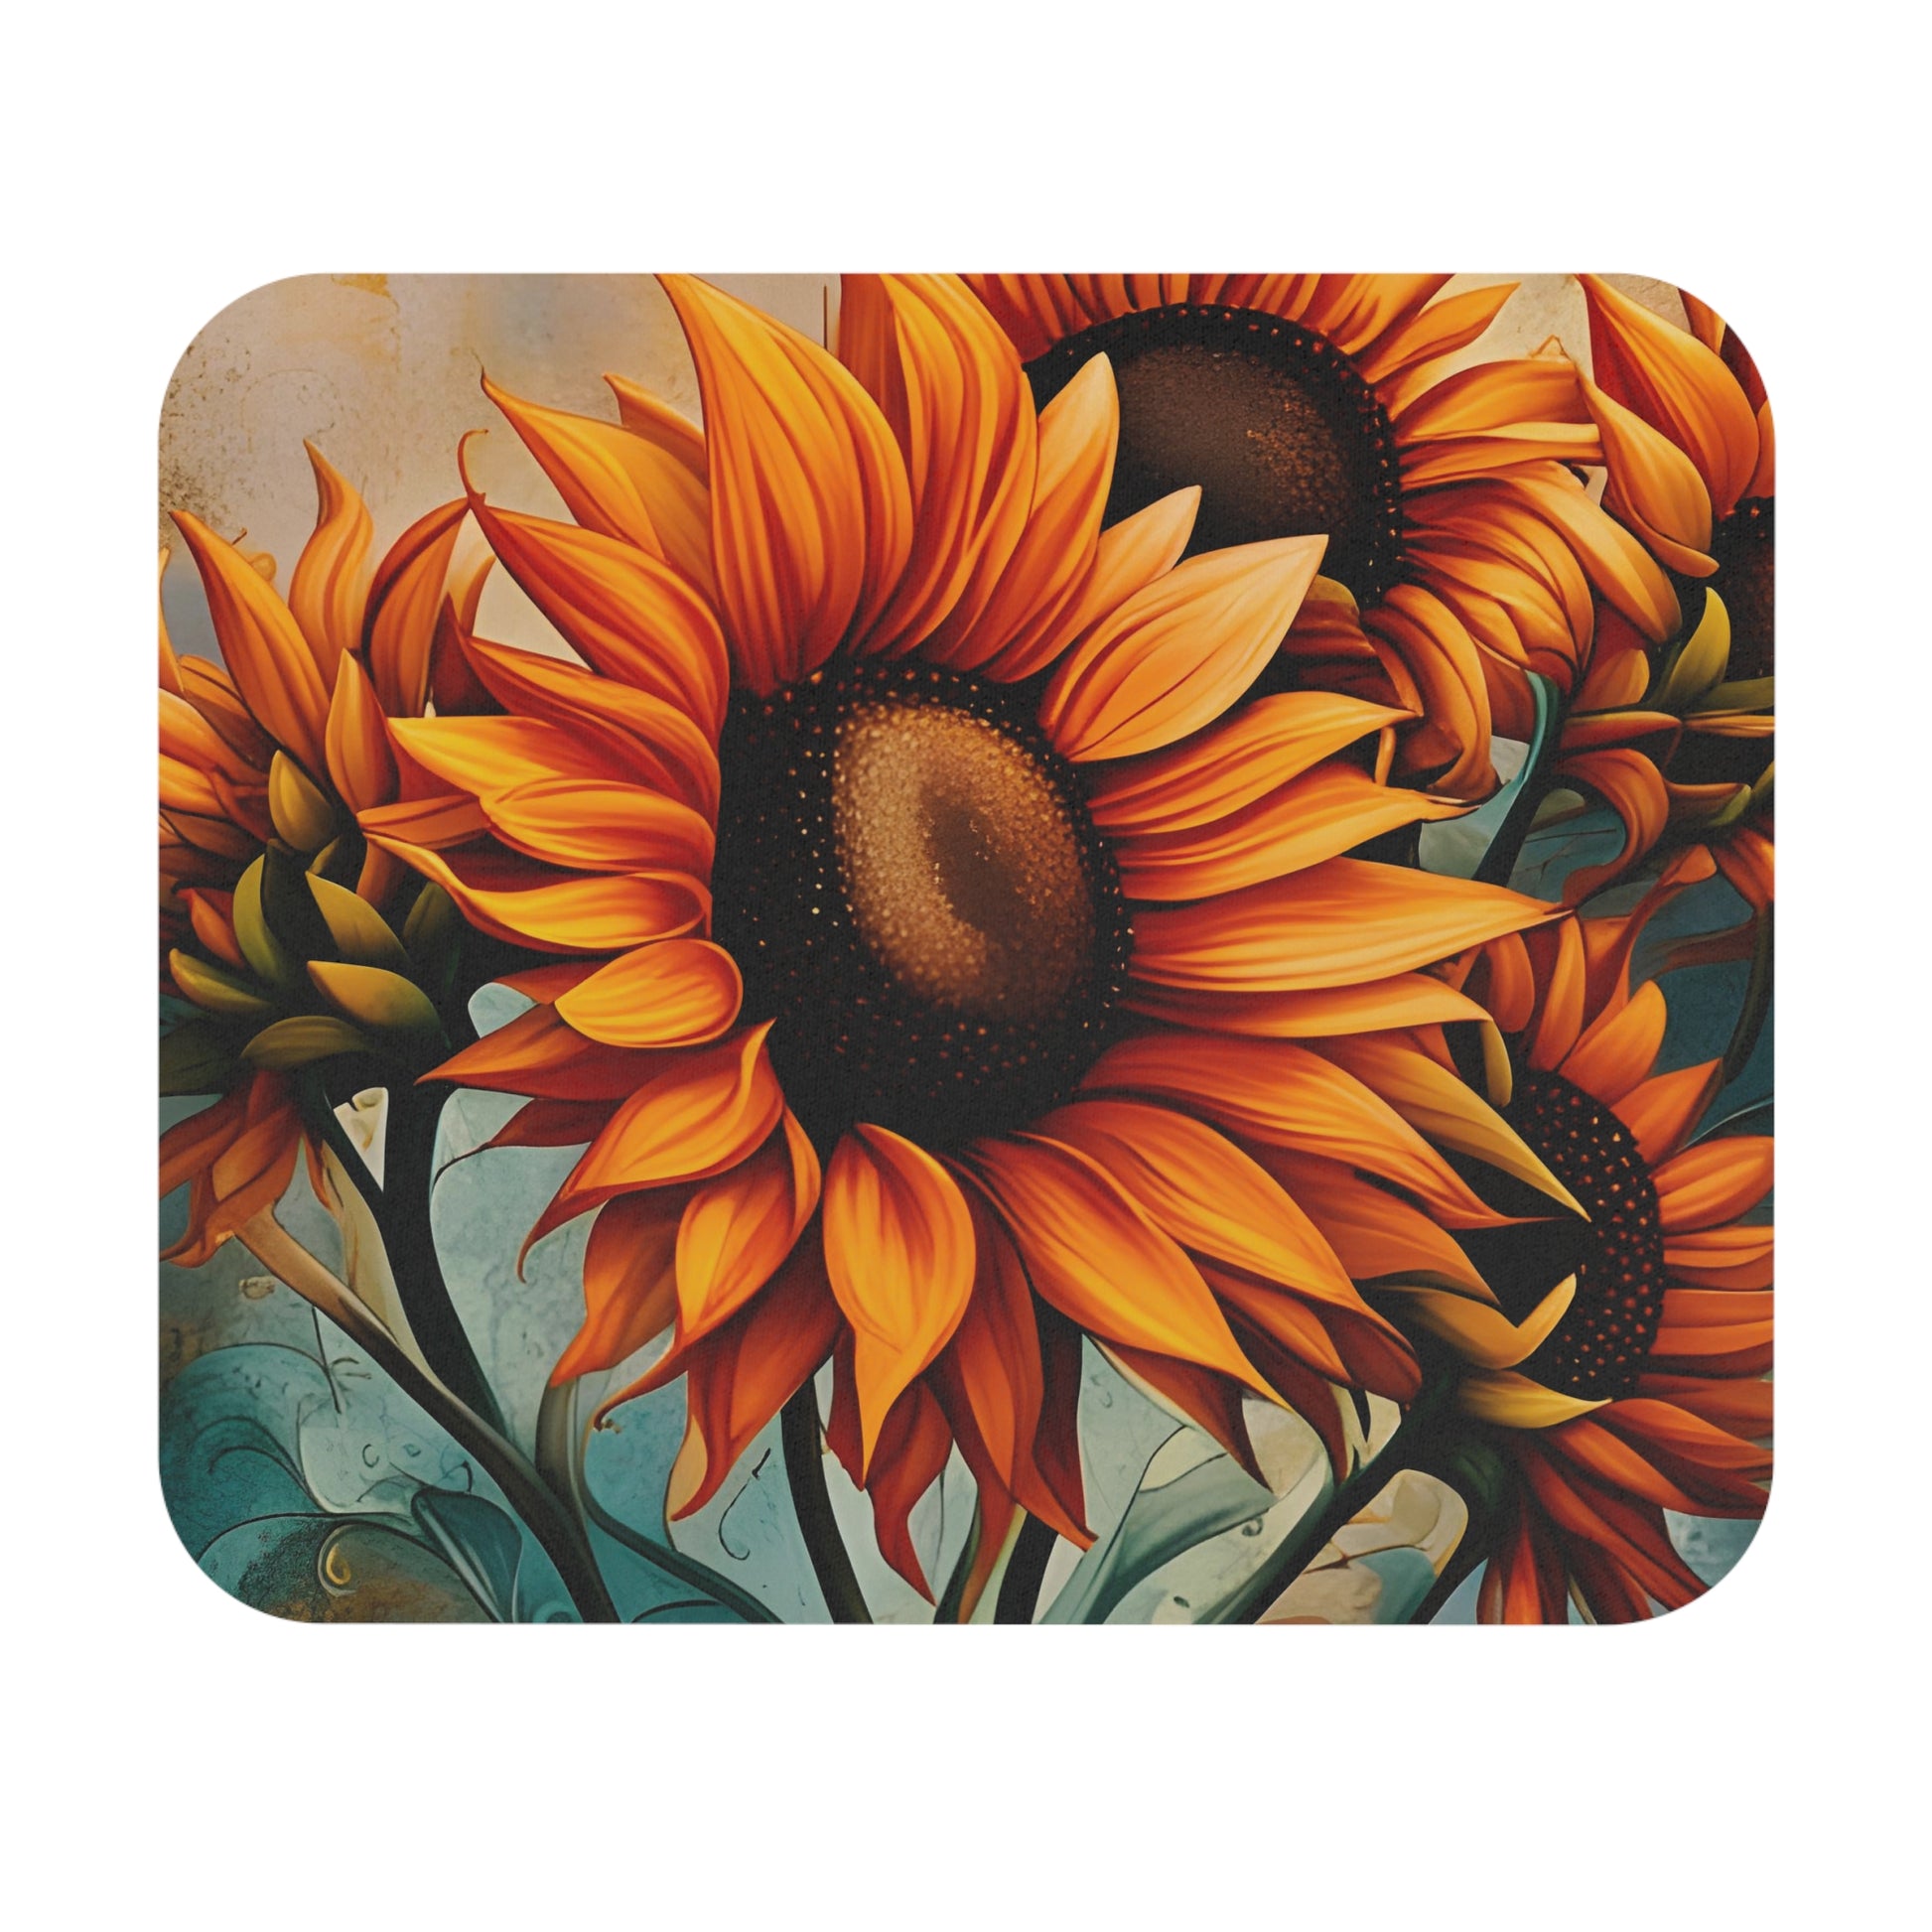 Sunflower Crop on Distressed Blue and Copper Background Printed on Mouse Pad